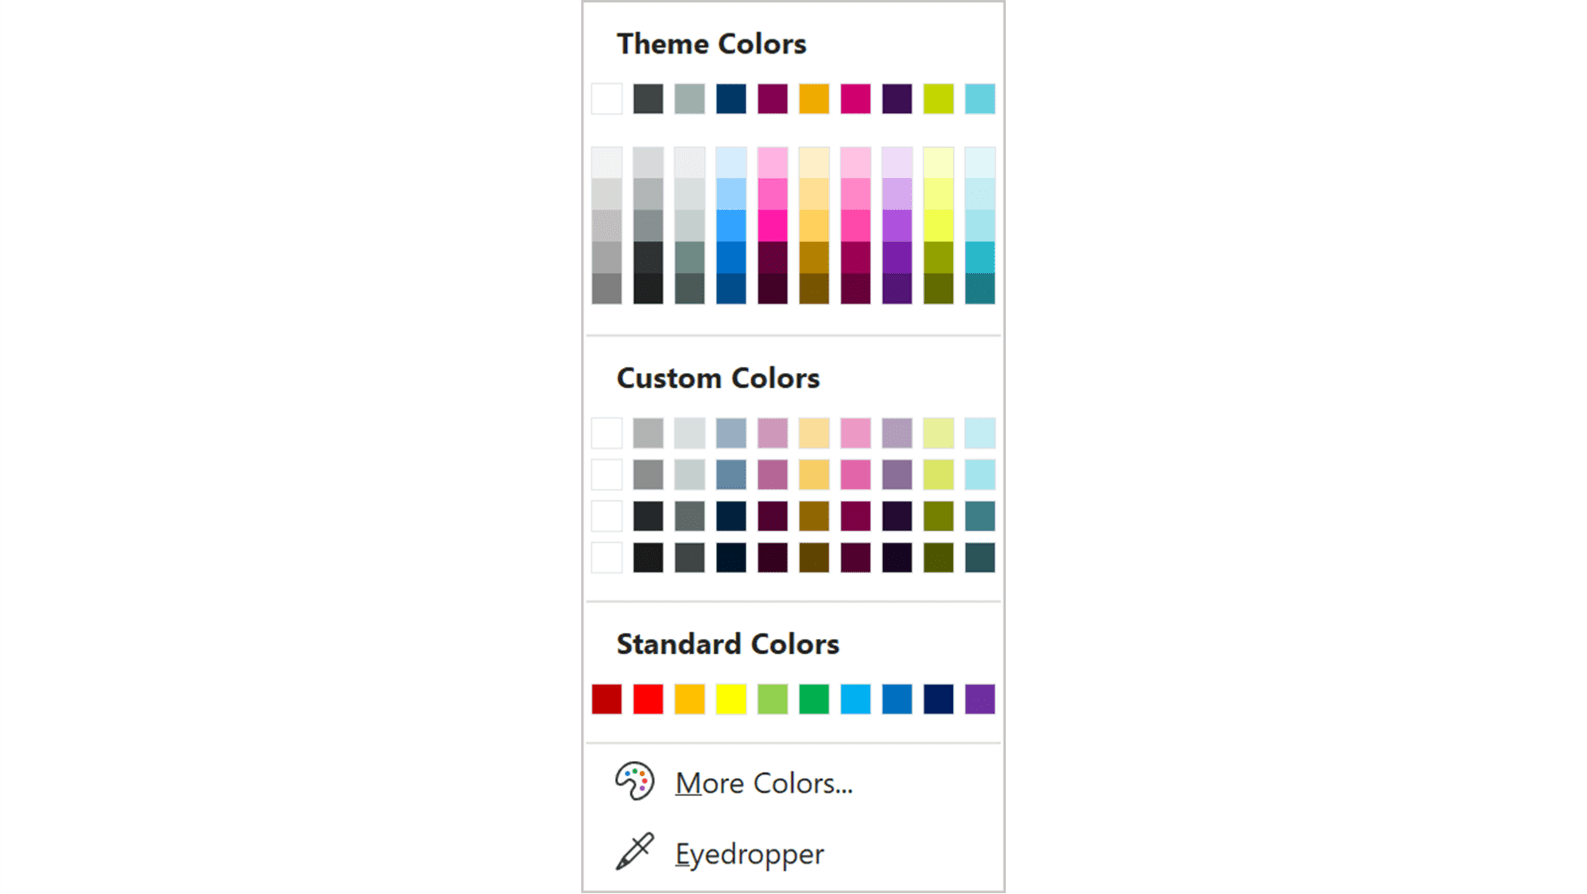 Screenshot of the Theme Colors panel in PowerPoint showing the BrightCarbon Custom Colors section.